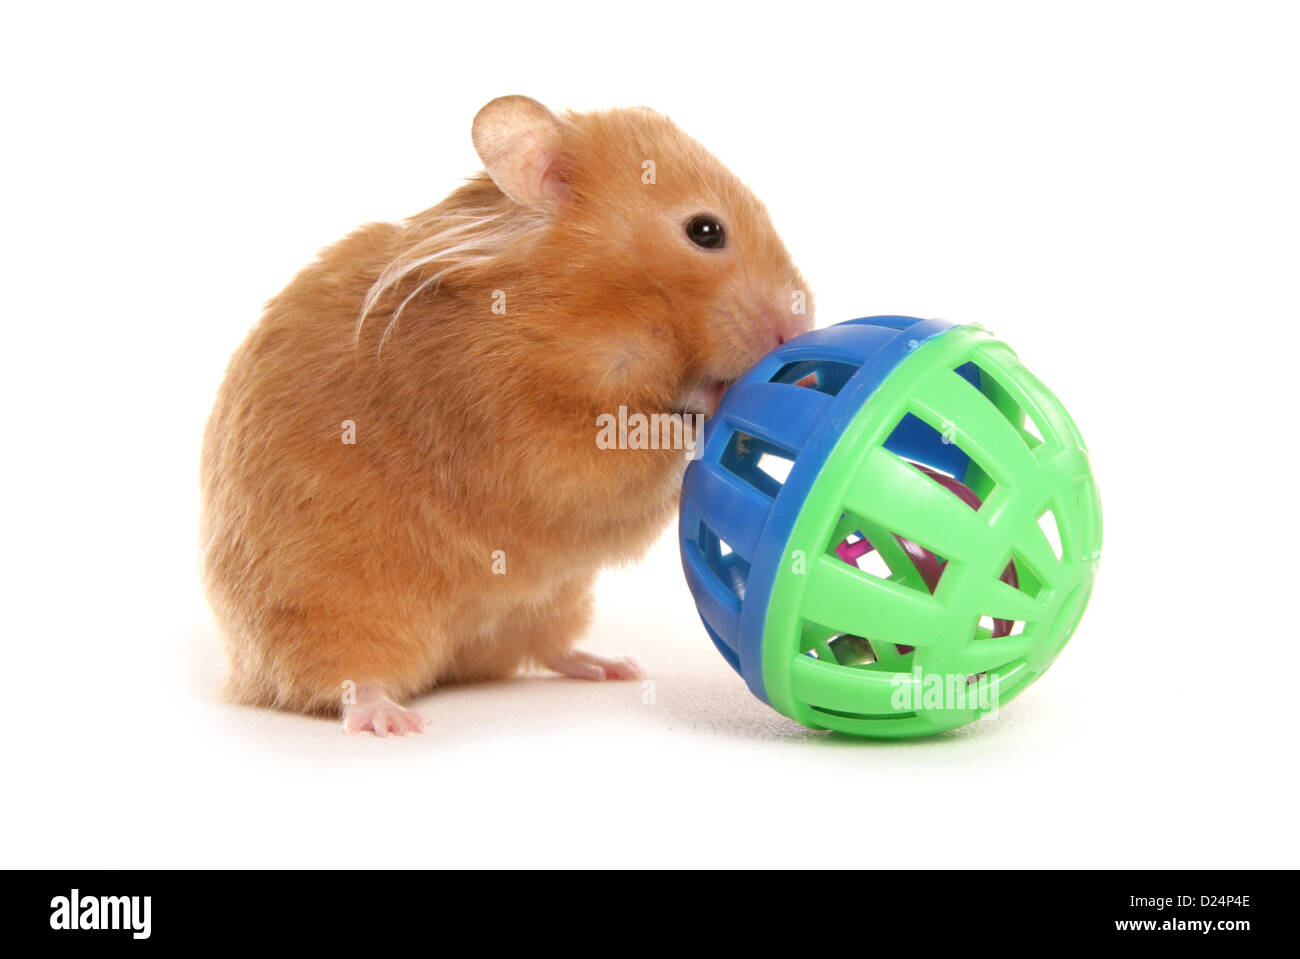 Domestic Hamster, adult, playing with toy Stock Photo - Alamy